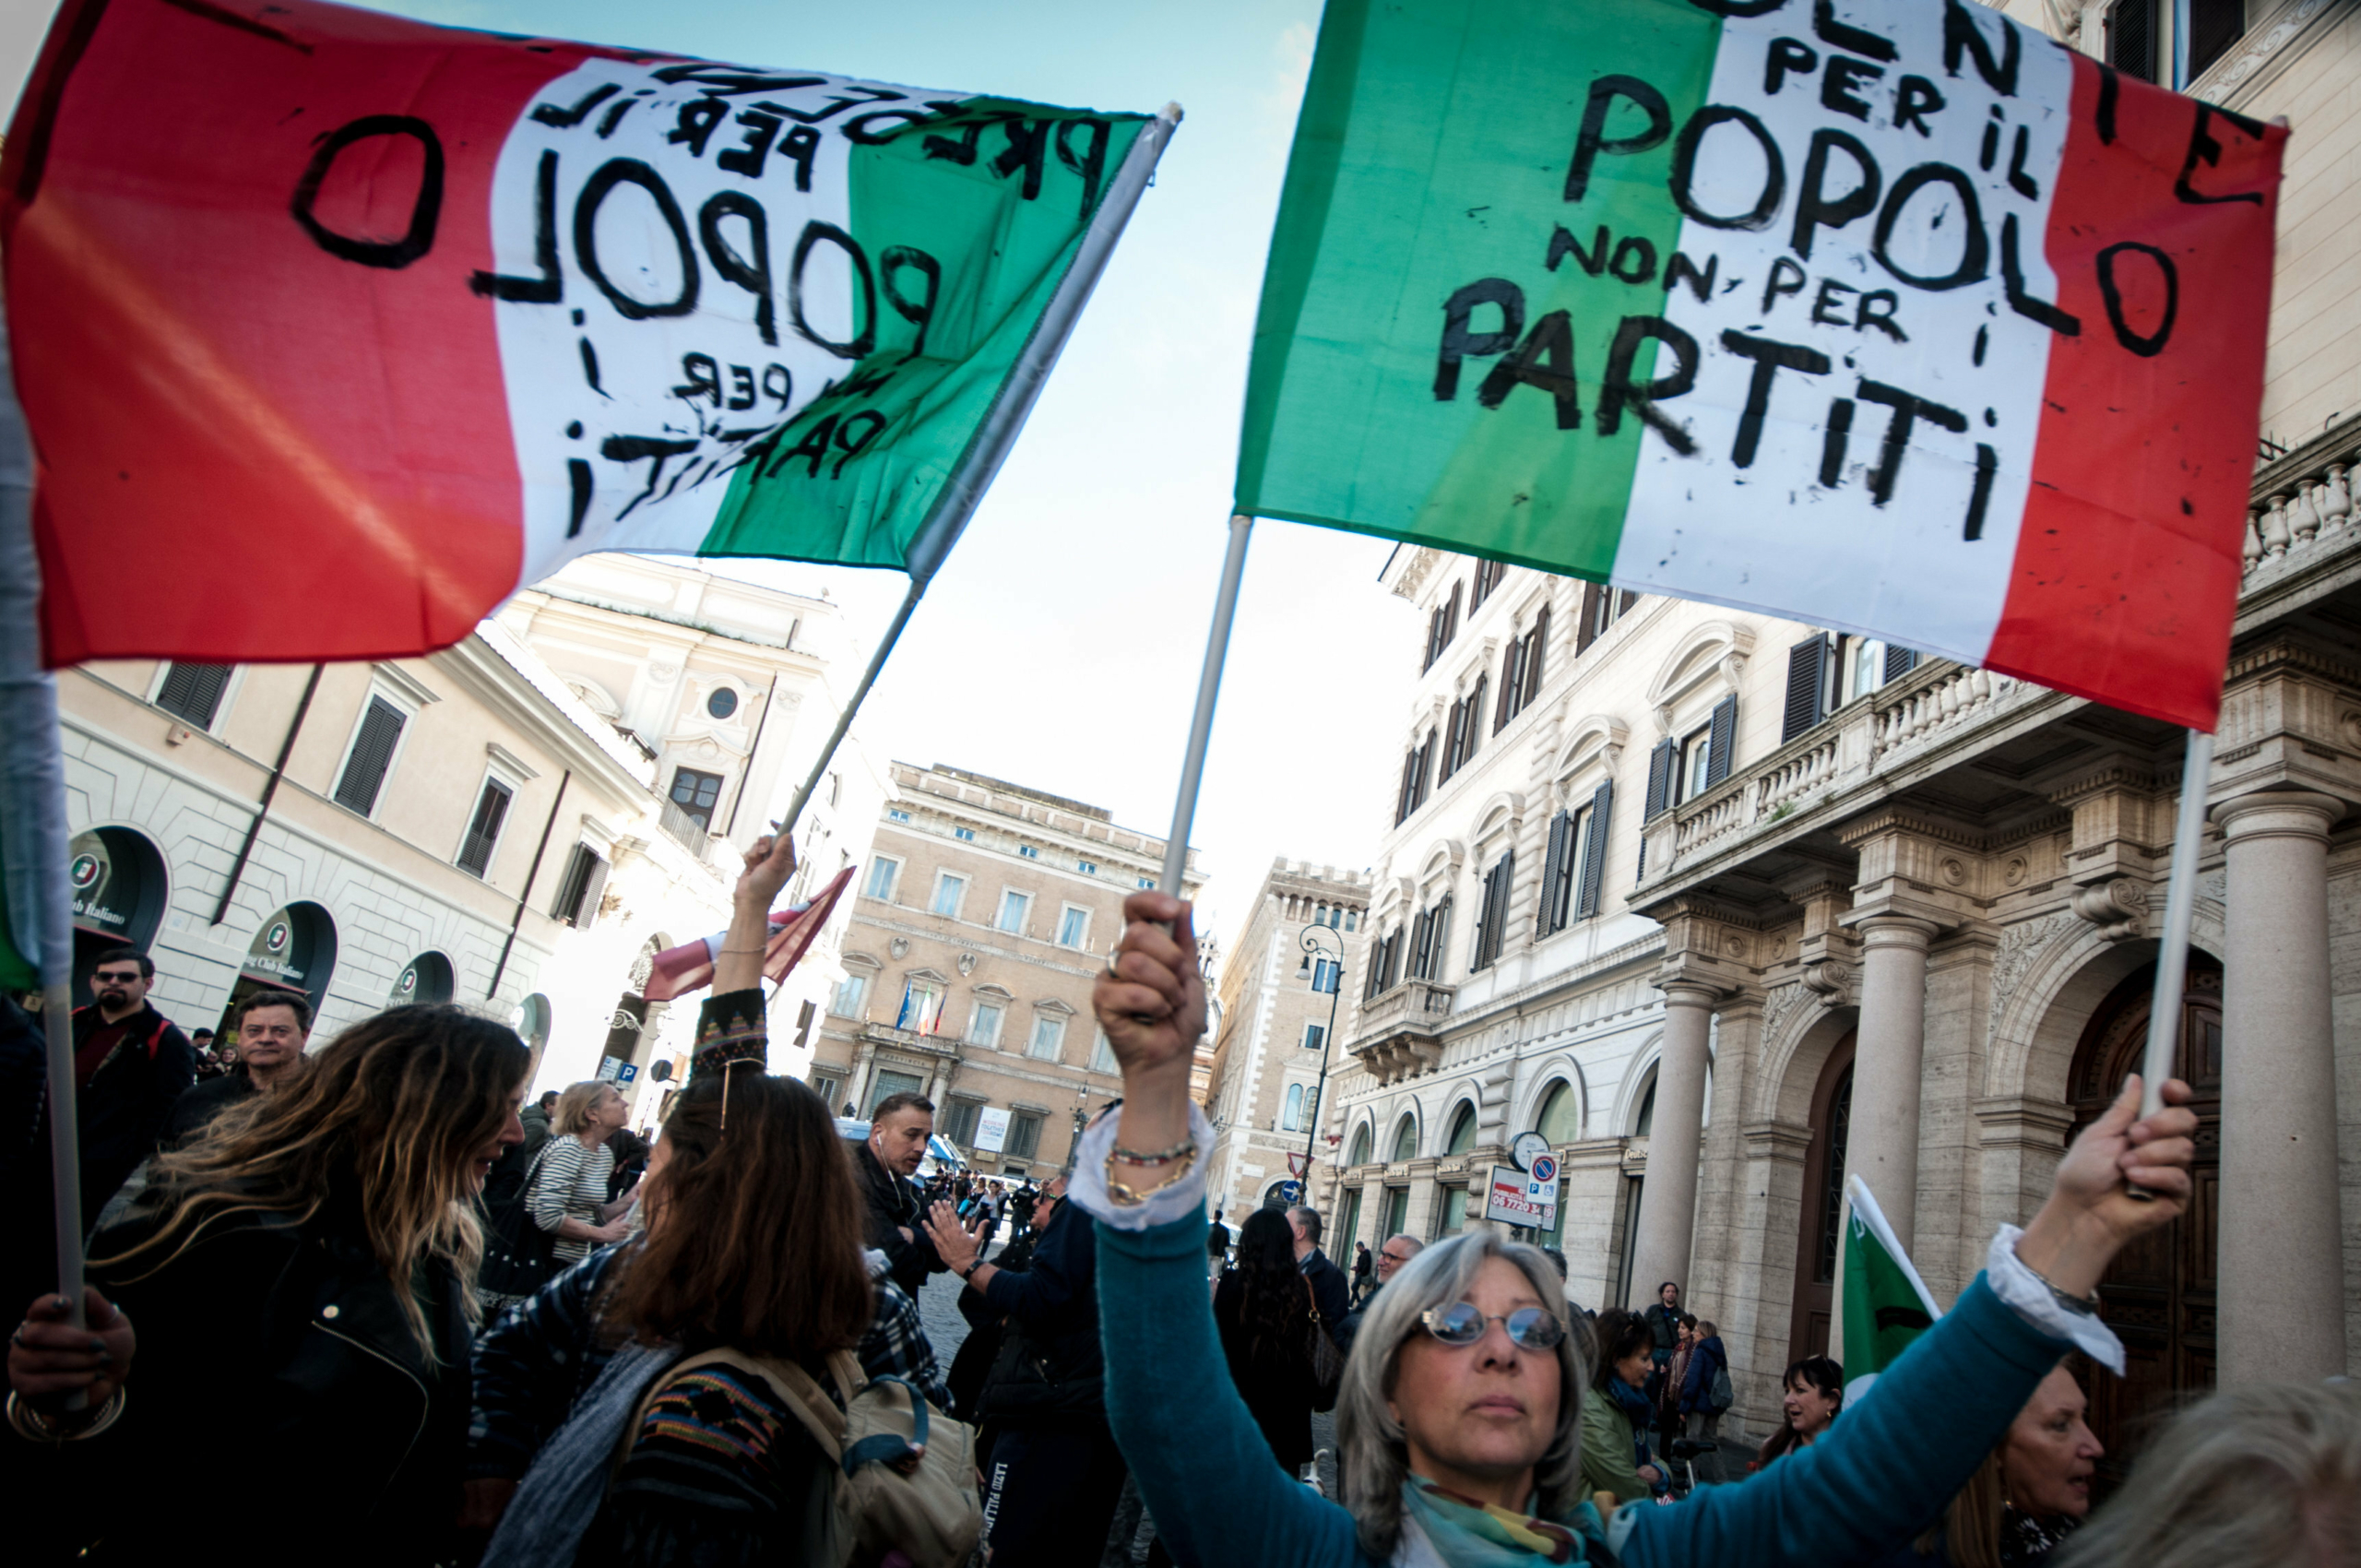 The Italian government's climate stance differs at home or abroad. Here's  why